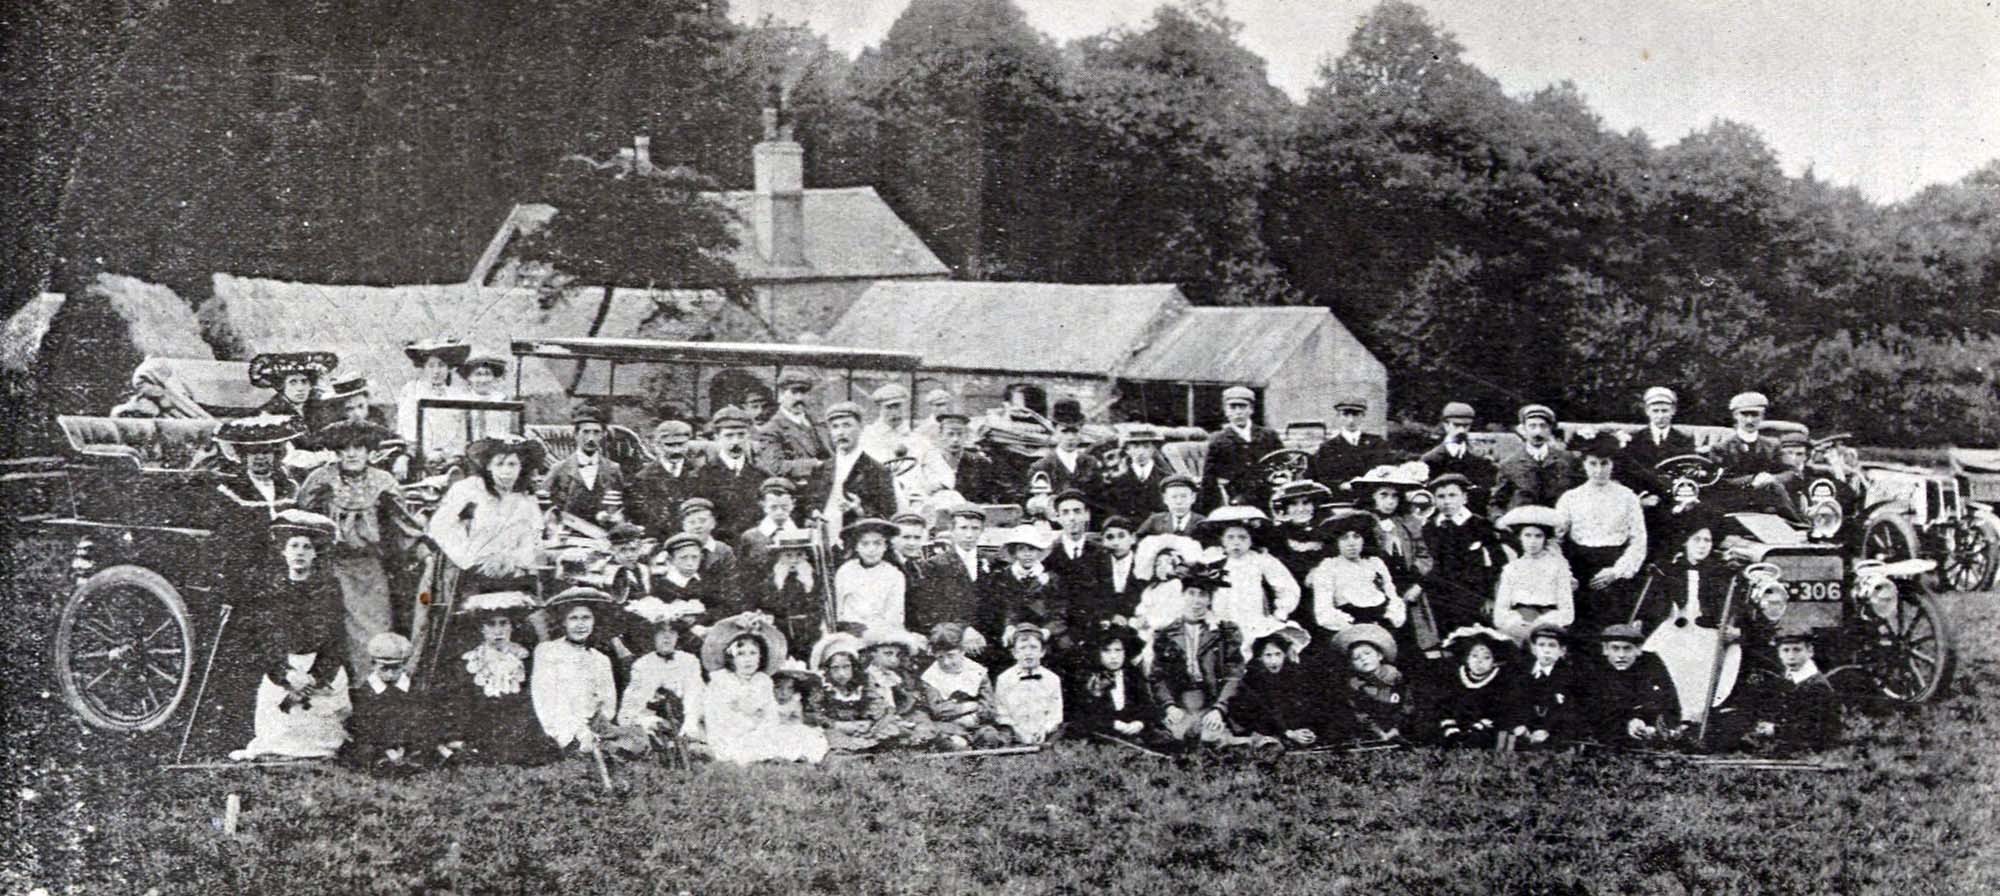 Excursion for disabled children, arranged by the Leicestershire Automobile Club, 1905 - Mosaic 1898